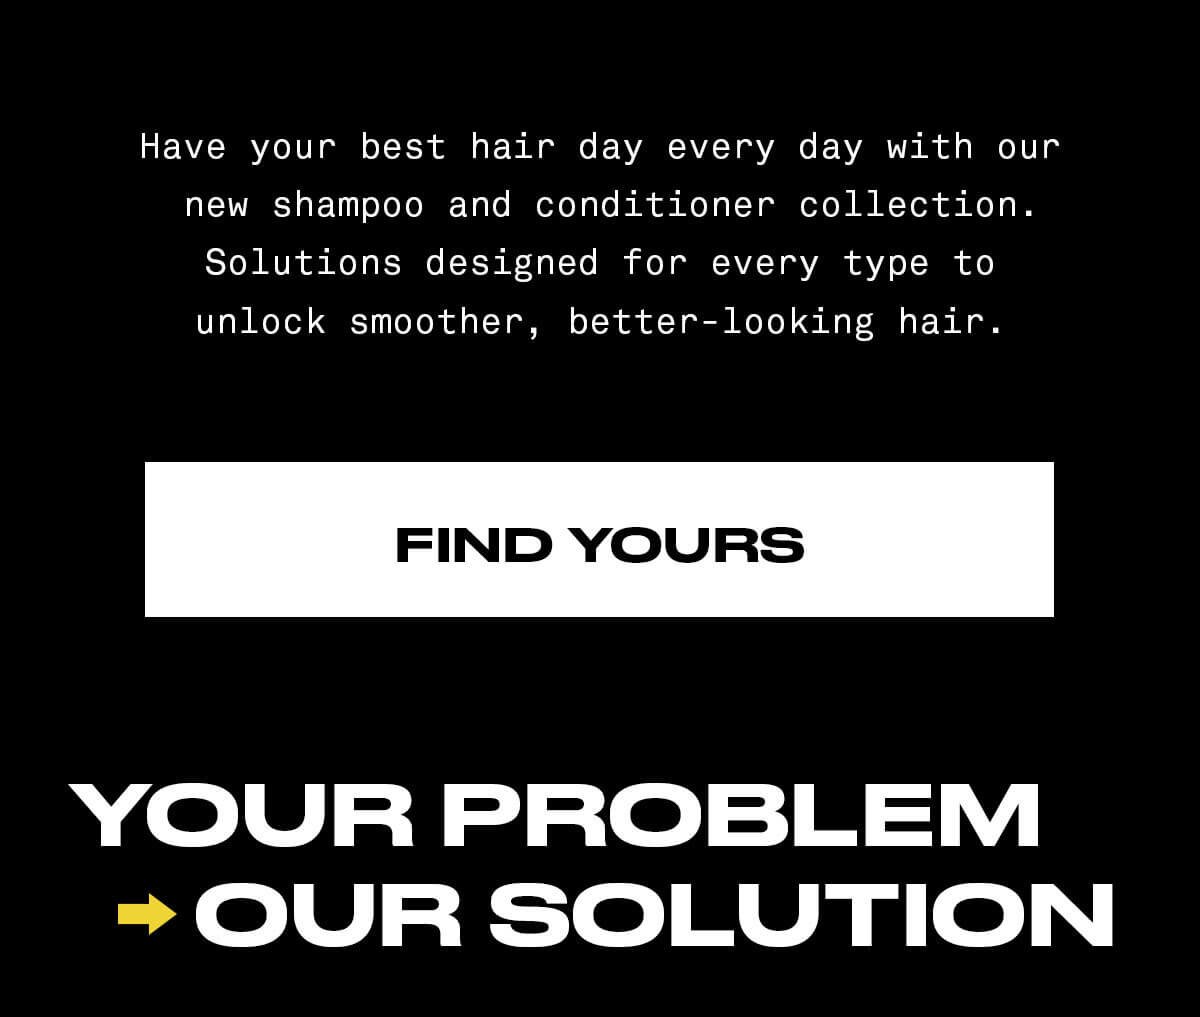 Have your best hair day every day. Give your routine an upgrade your future self will thank you for with sets for every hair type. FIND YOURS YOUR PROBLEM OUR SOLUTION